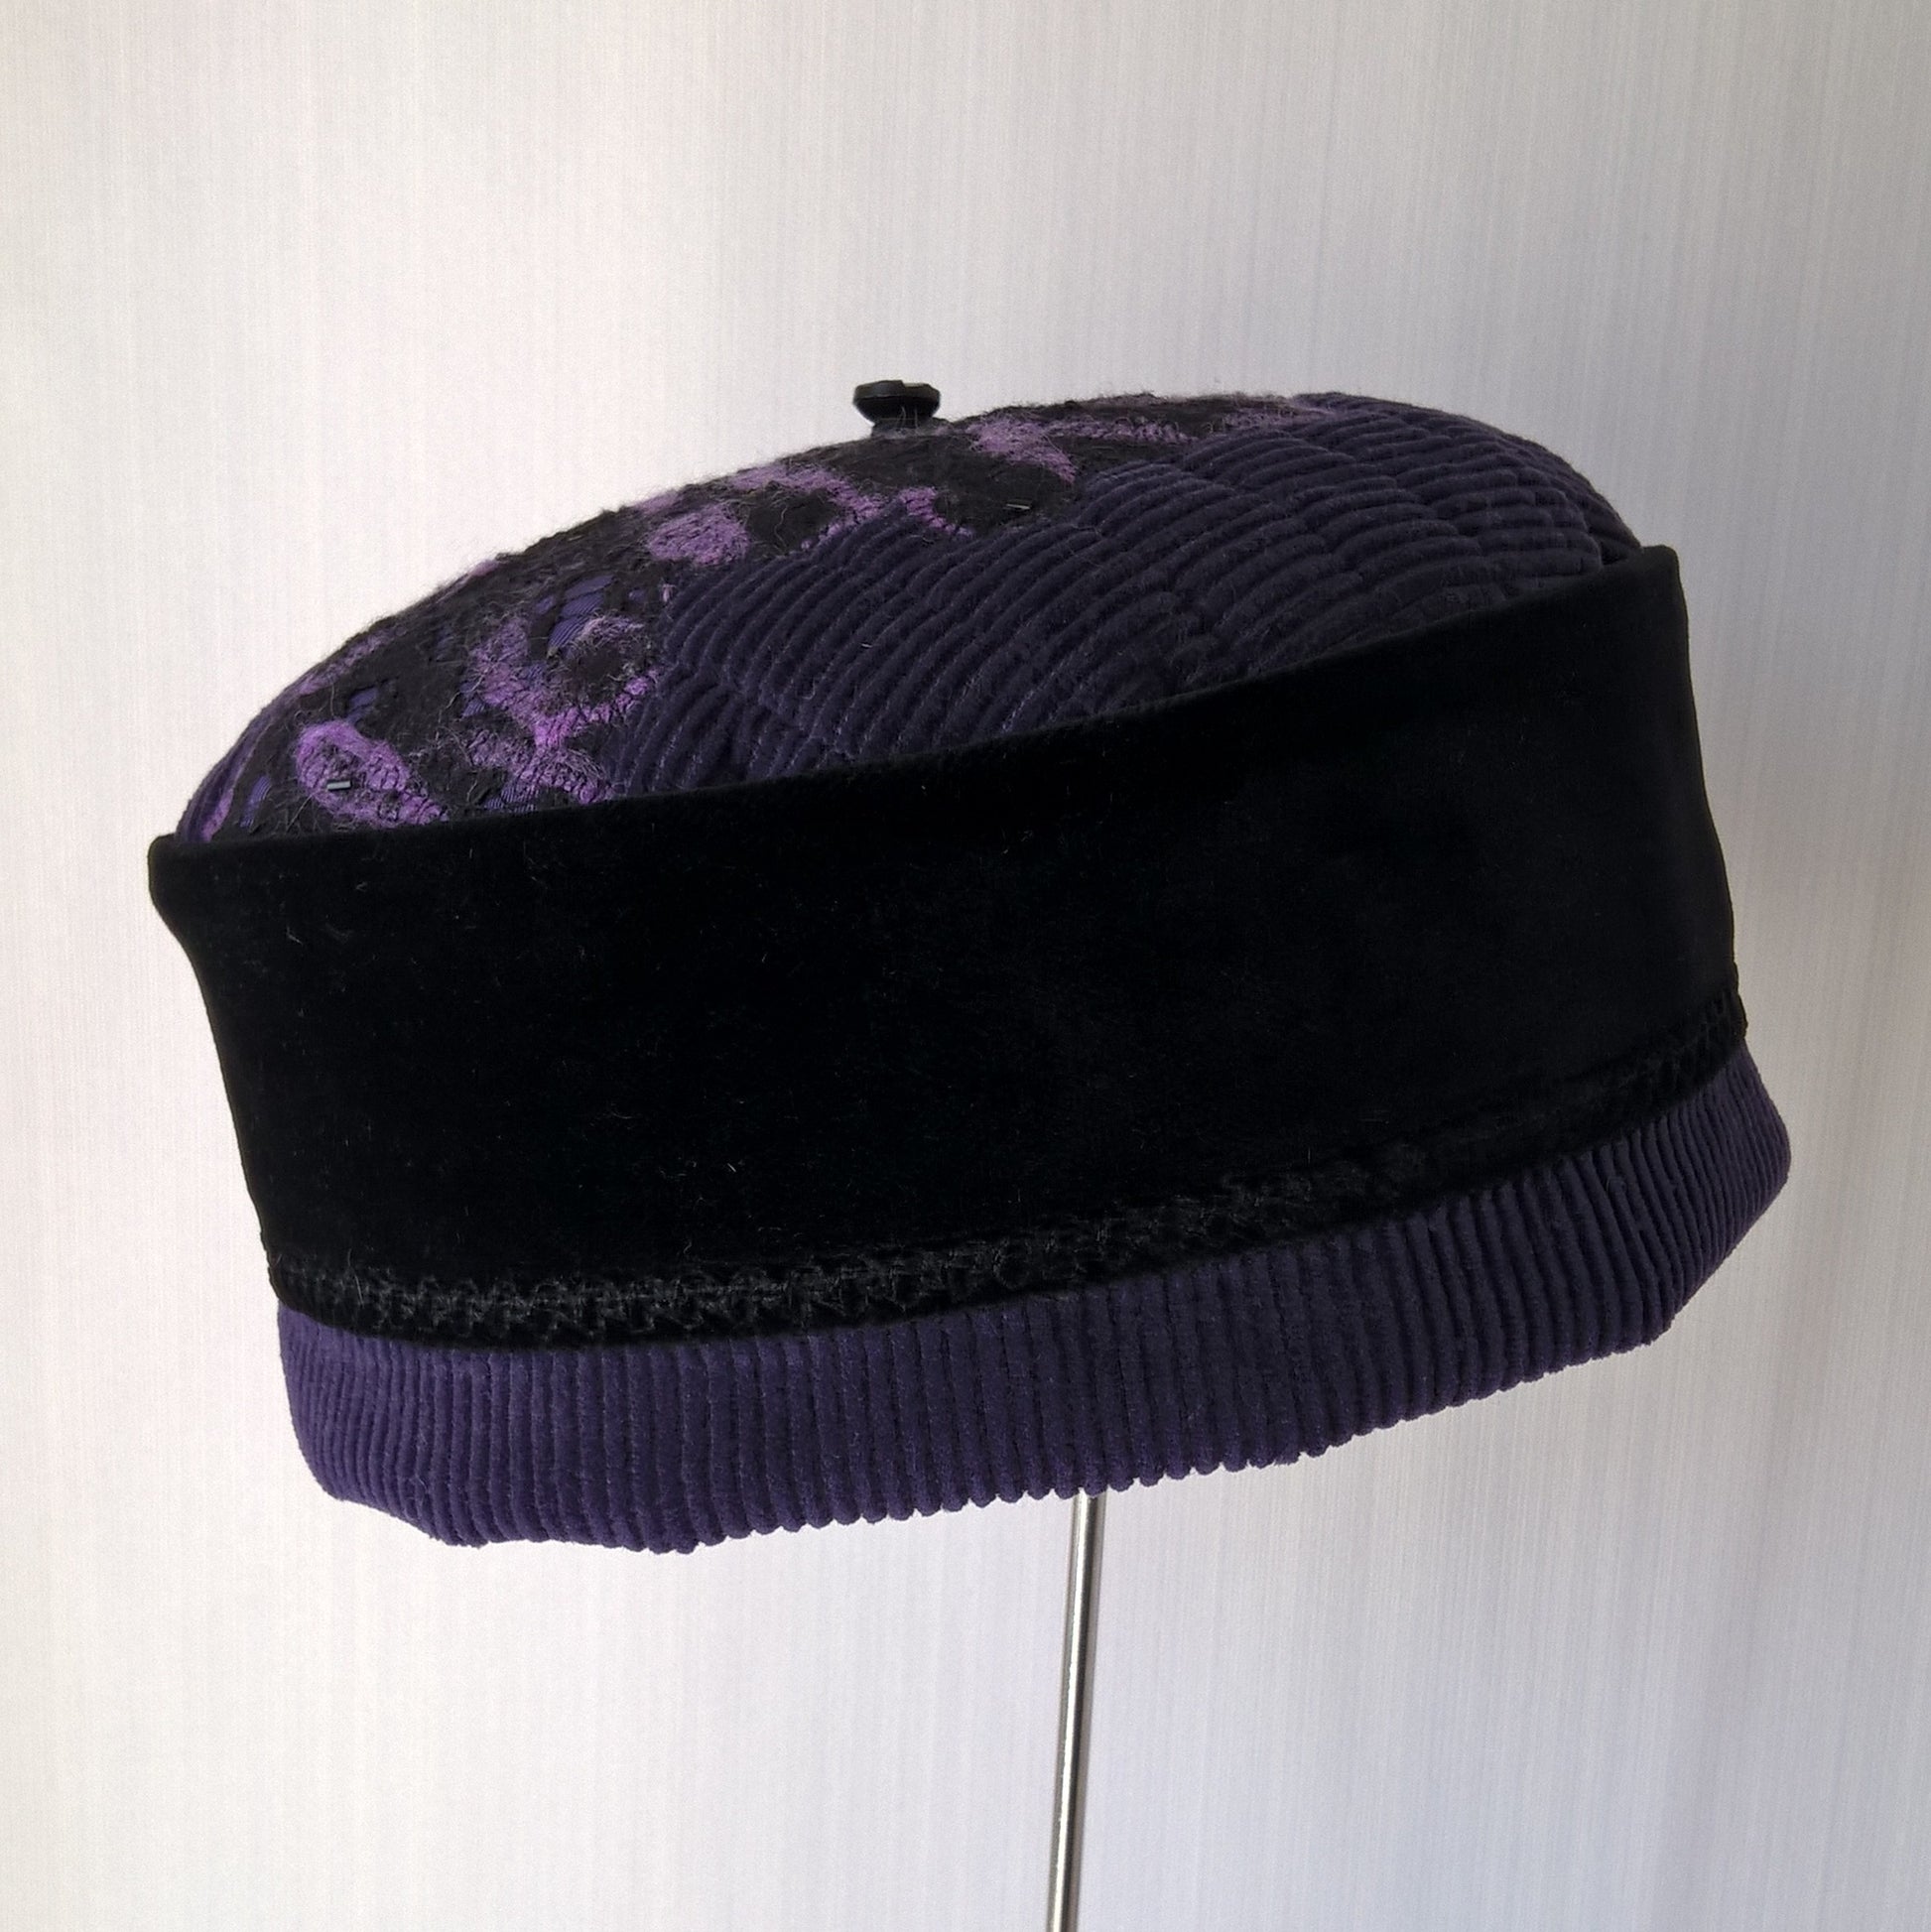 Velvet and corduroy pillbox hat with vintage button and removable tassel